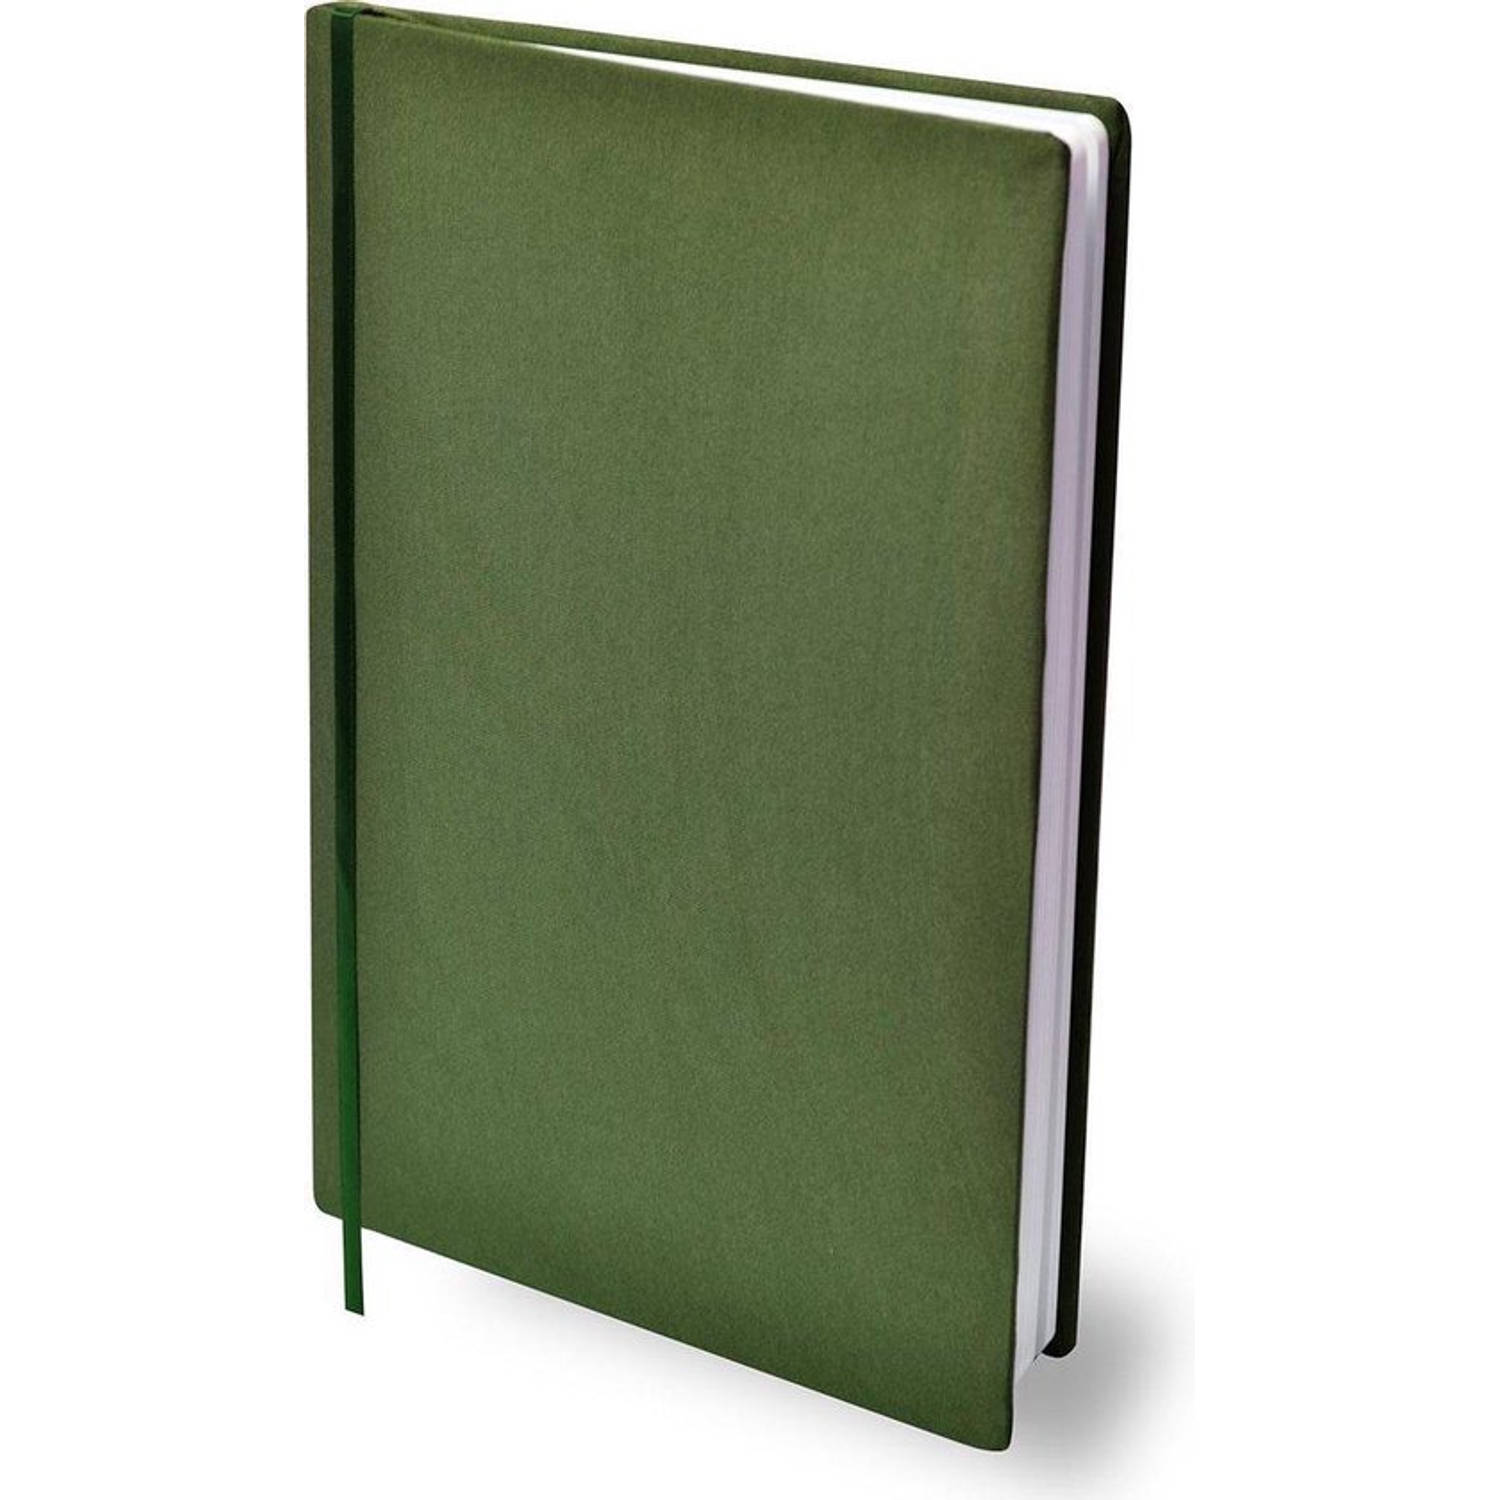 Dresz Stretchable Book Cover A4 Army Green 6-pack Legergroen